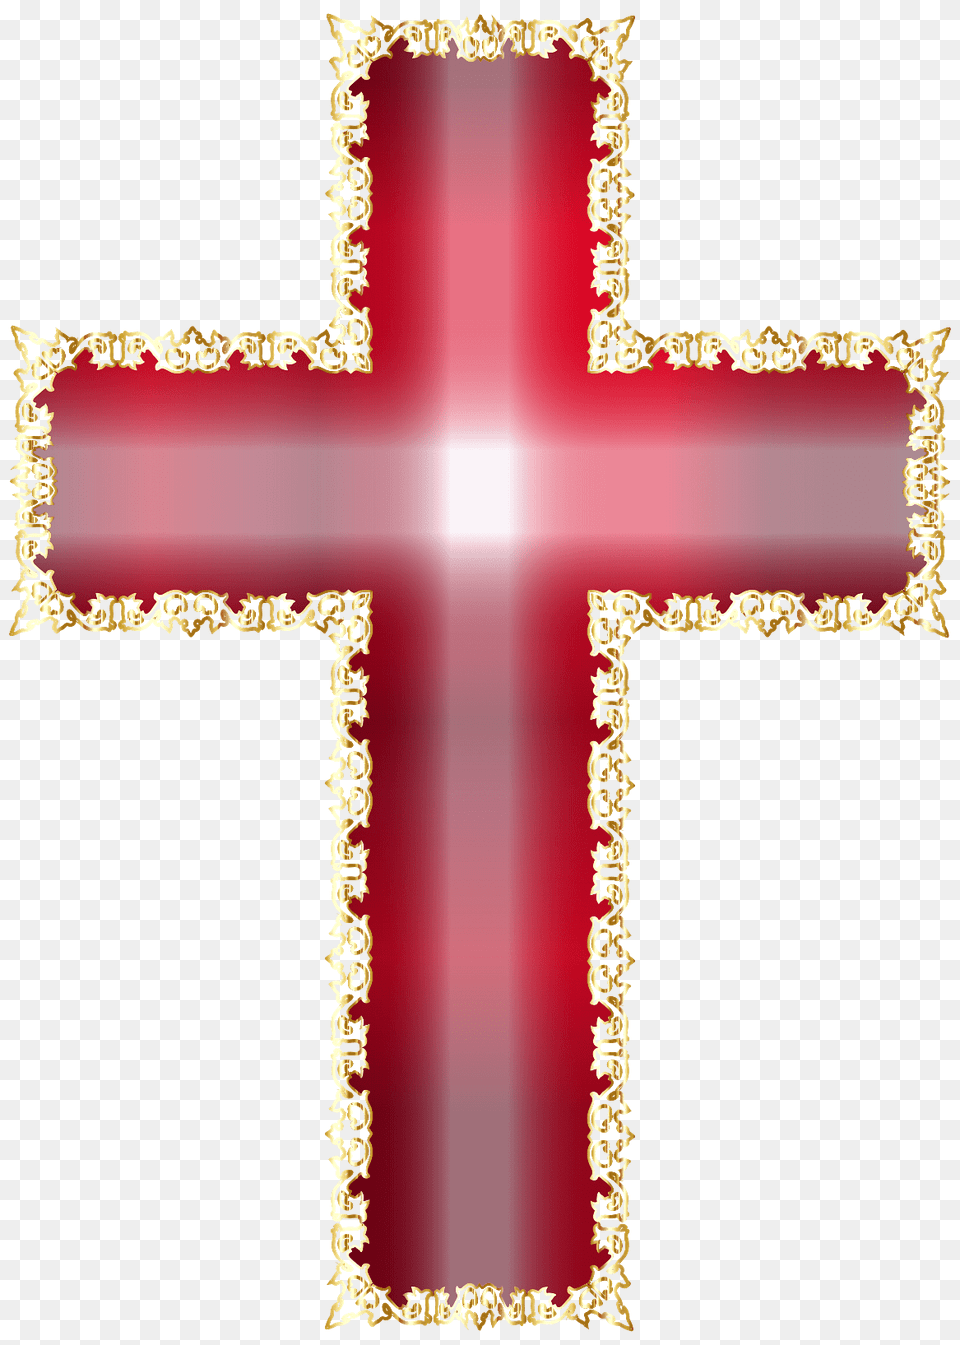 Red Cross With Golden Outline, Symbol Png Image